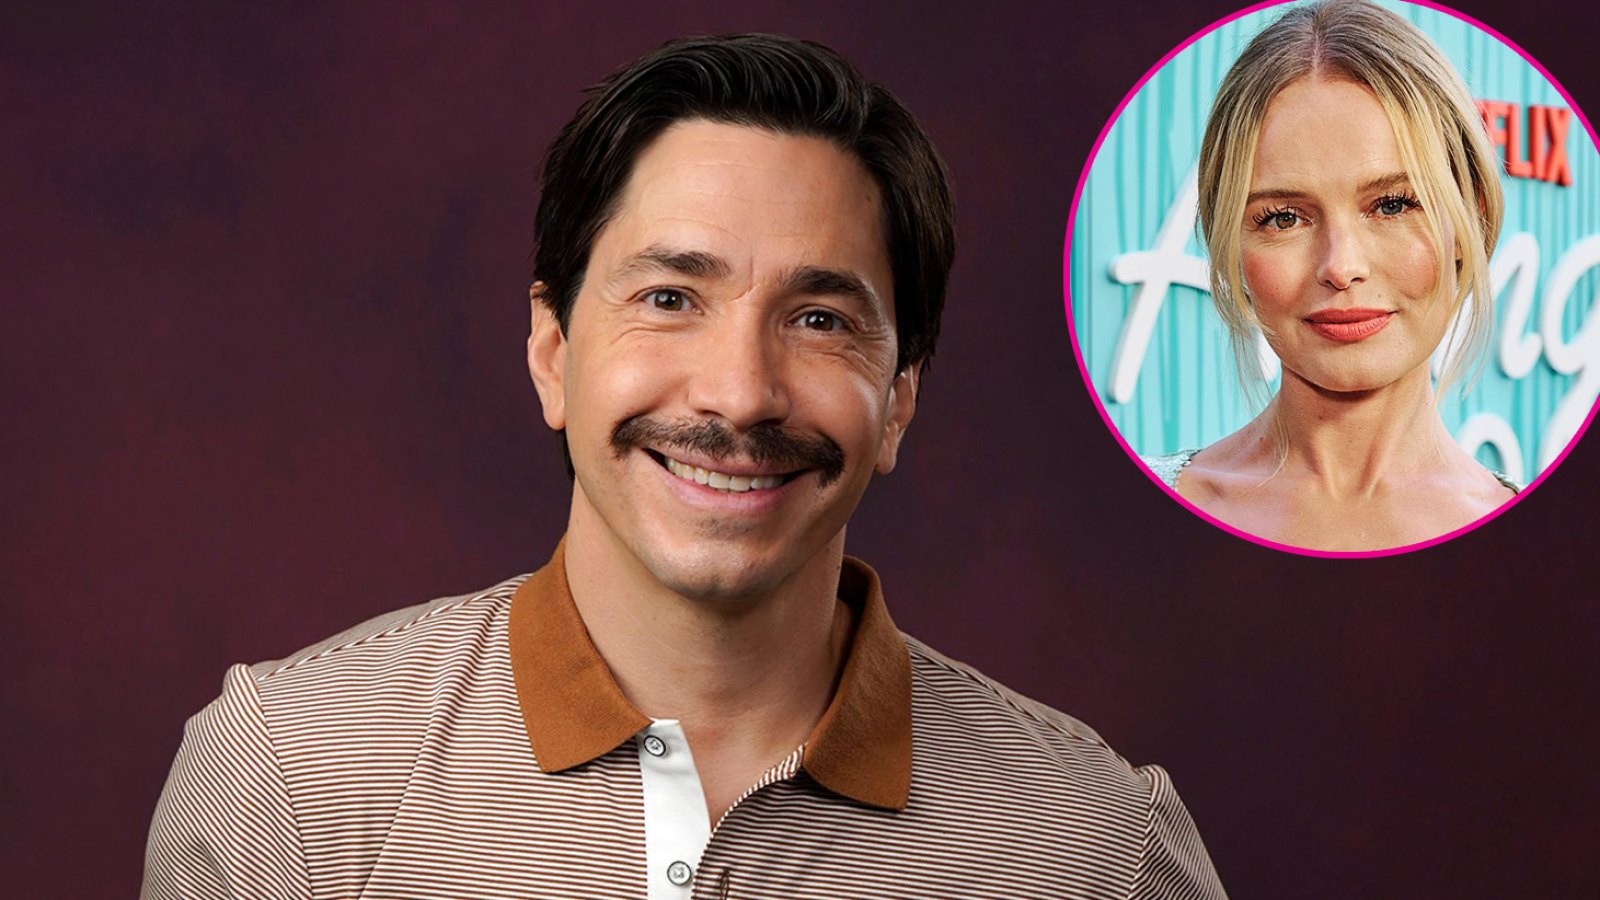 Kate Bosworth and Justin Long’s Relationship Timeline- From Coworkers to Real-Life Couple 252